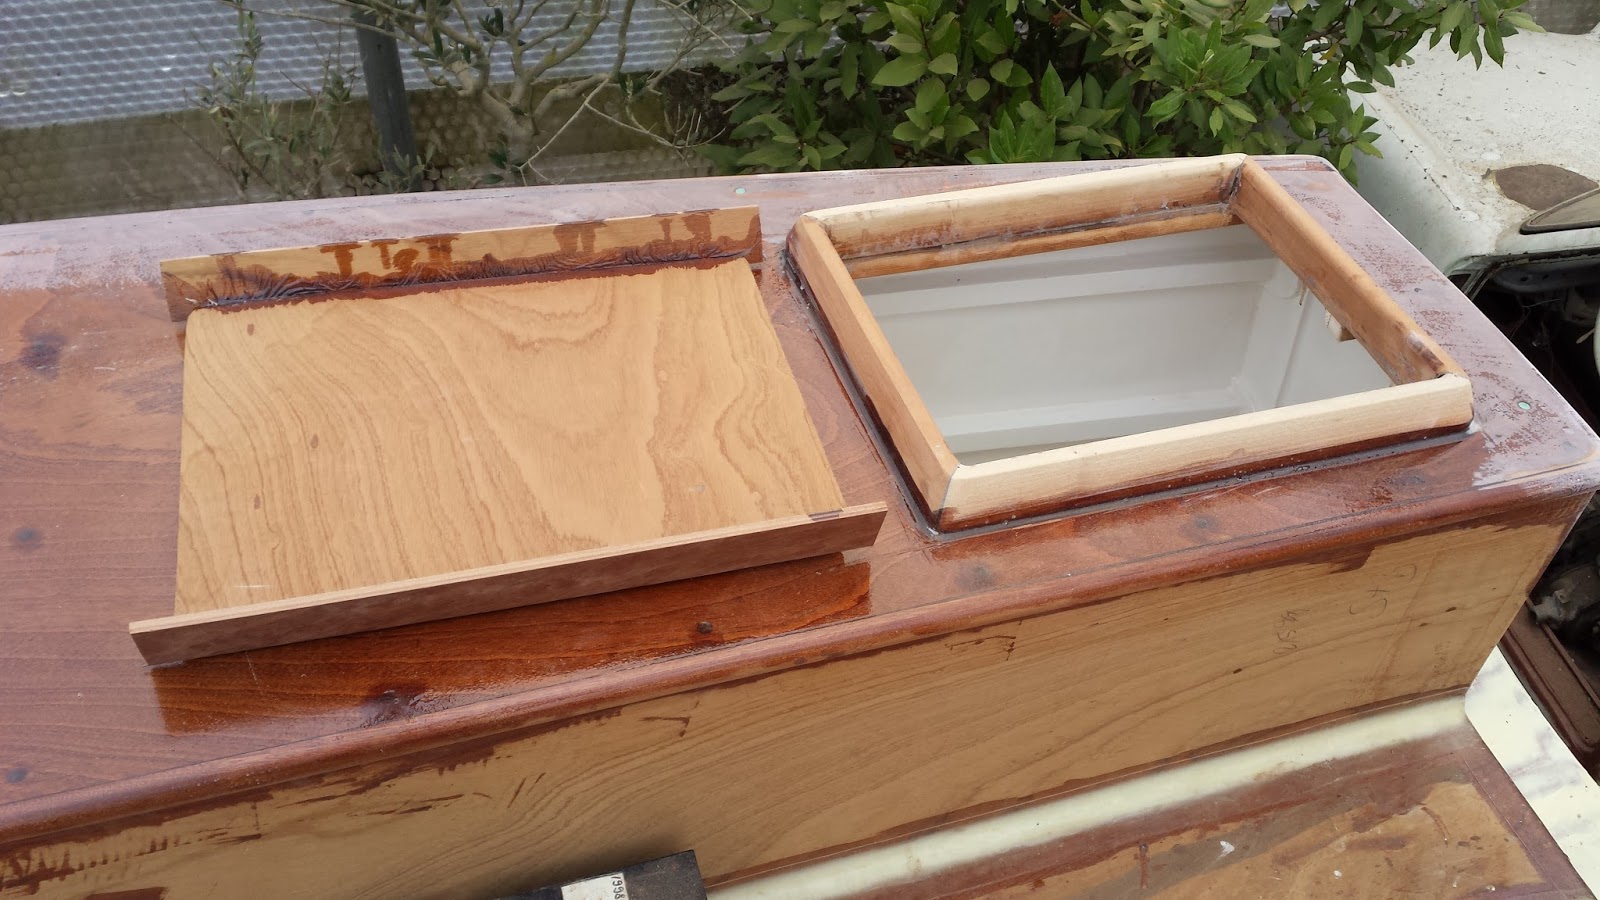 Wooden Boat Building Blog: Making Hatch Covers for the Aft ...